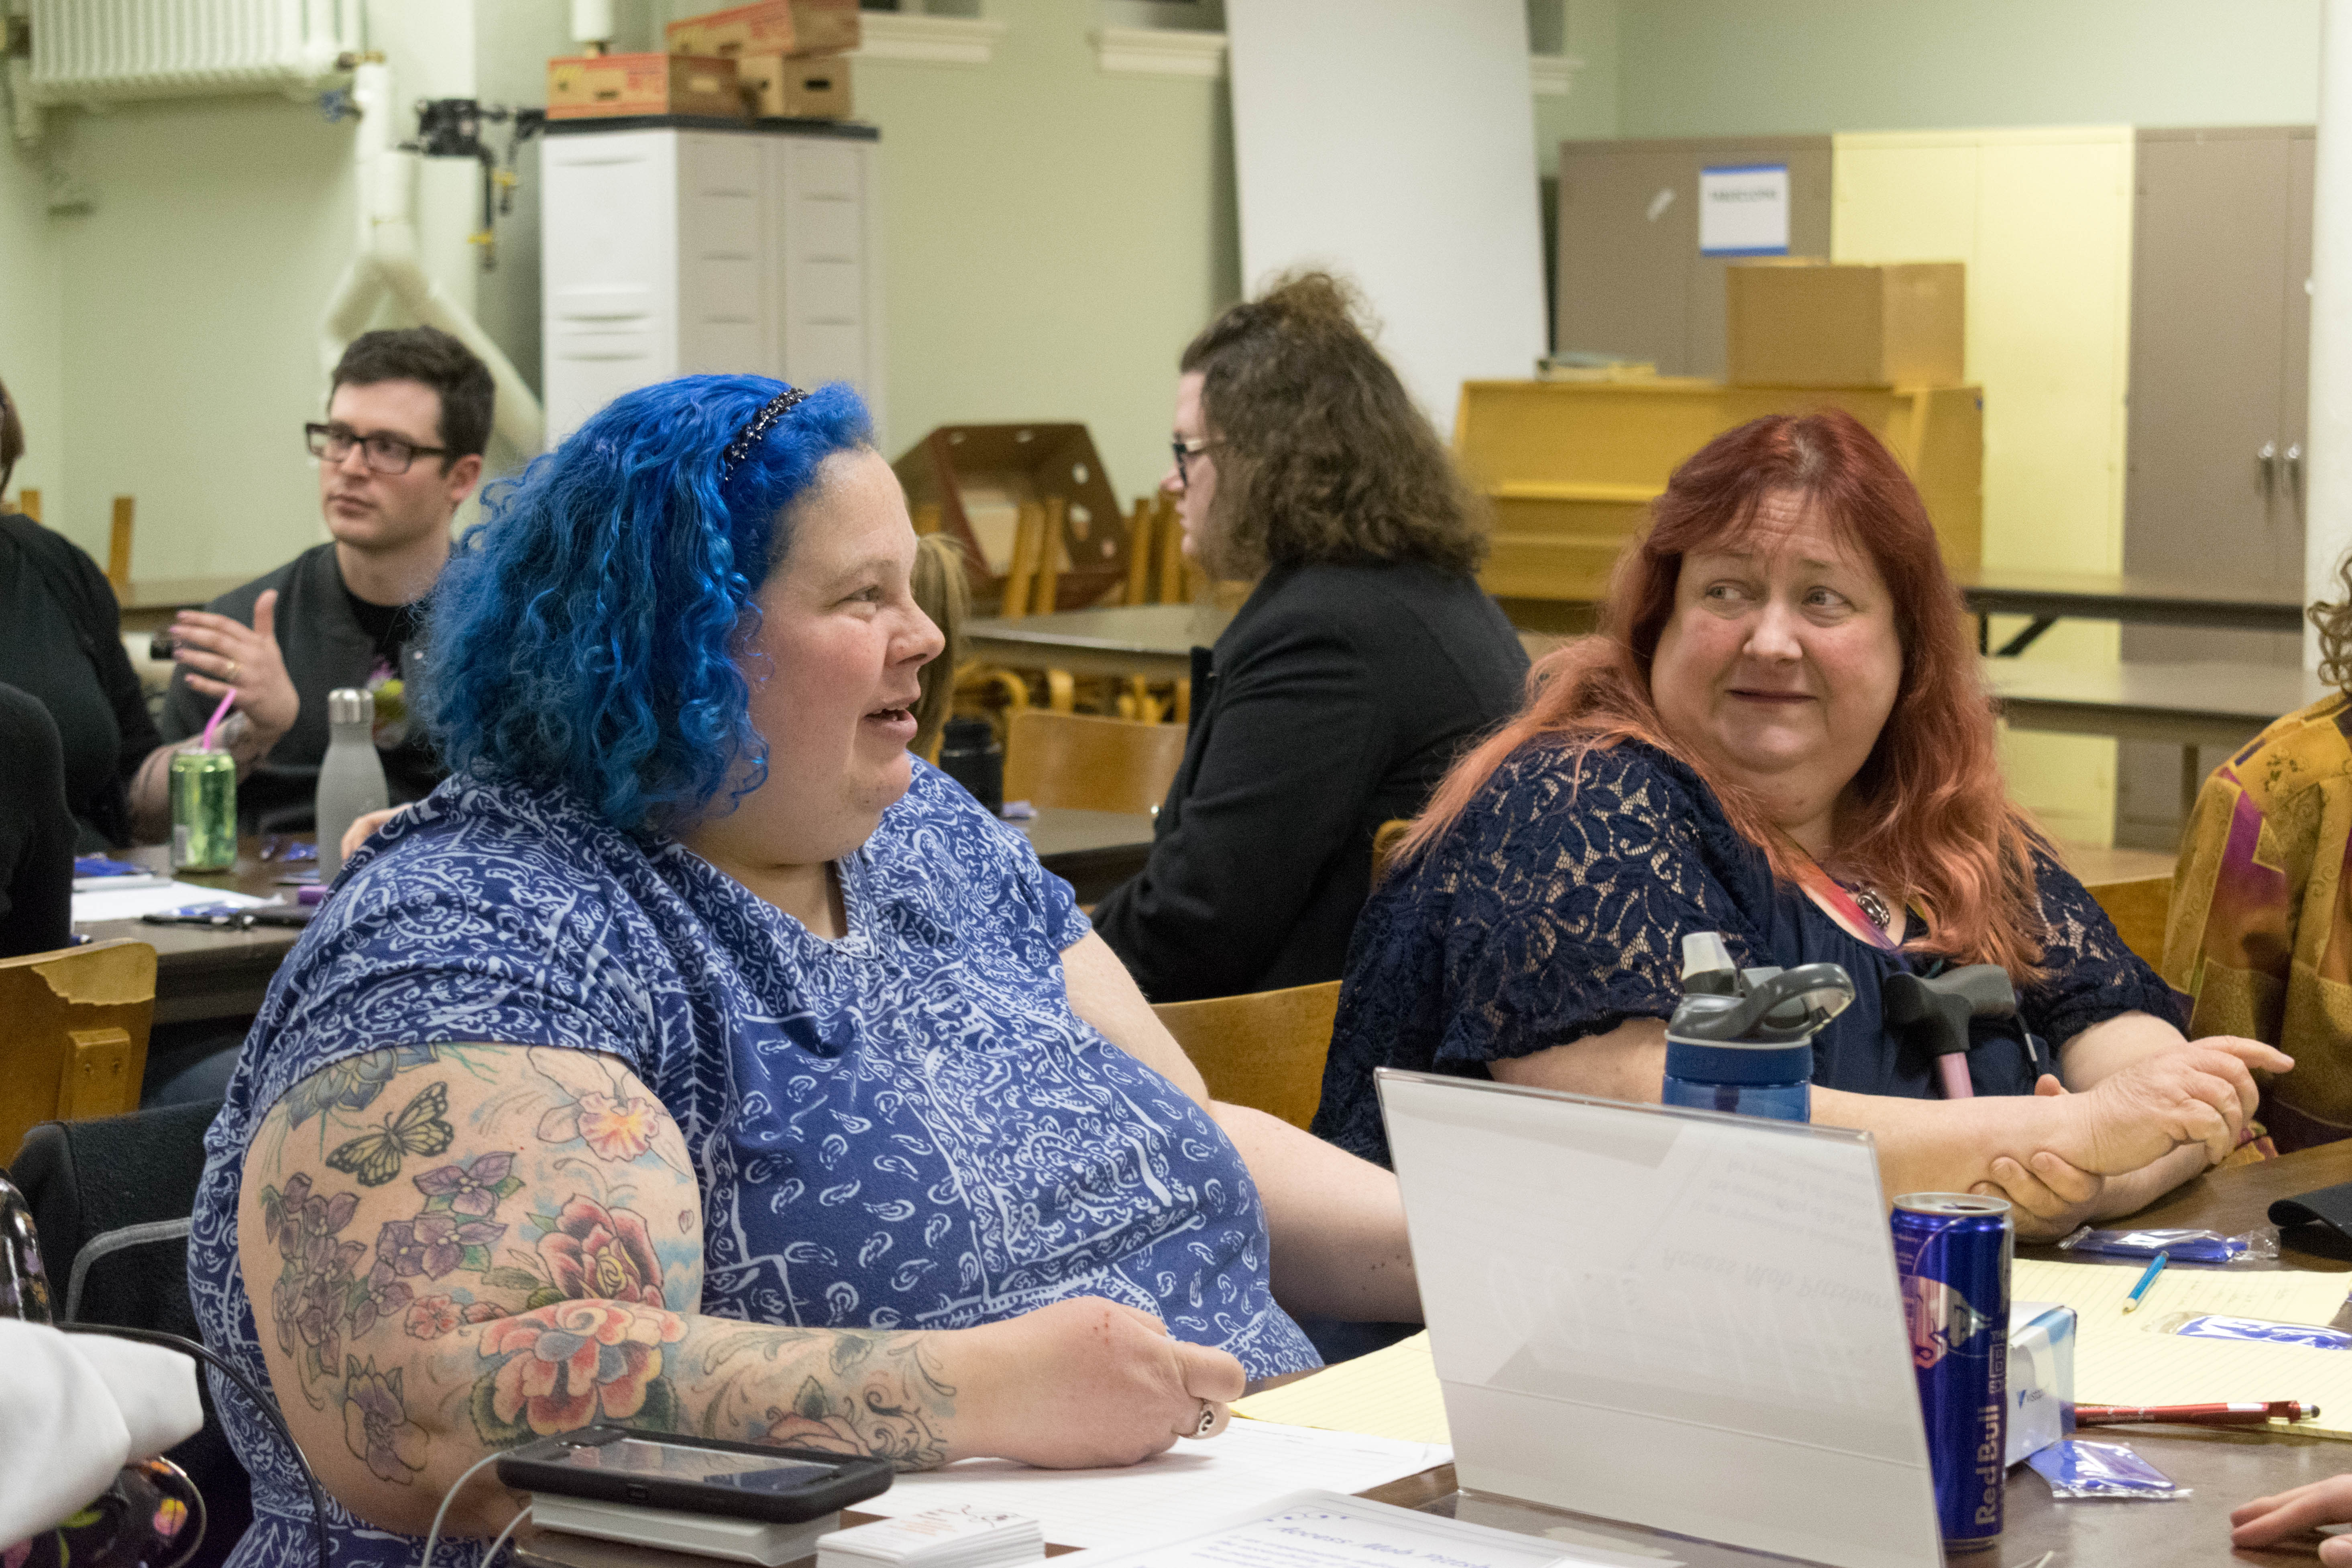 woman at left with blue hair smiling and talking.